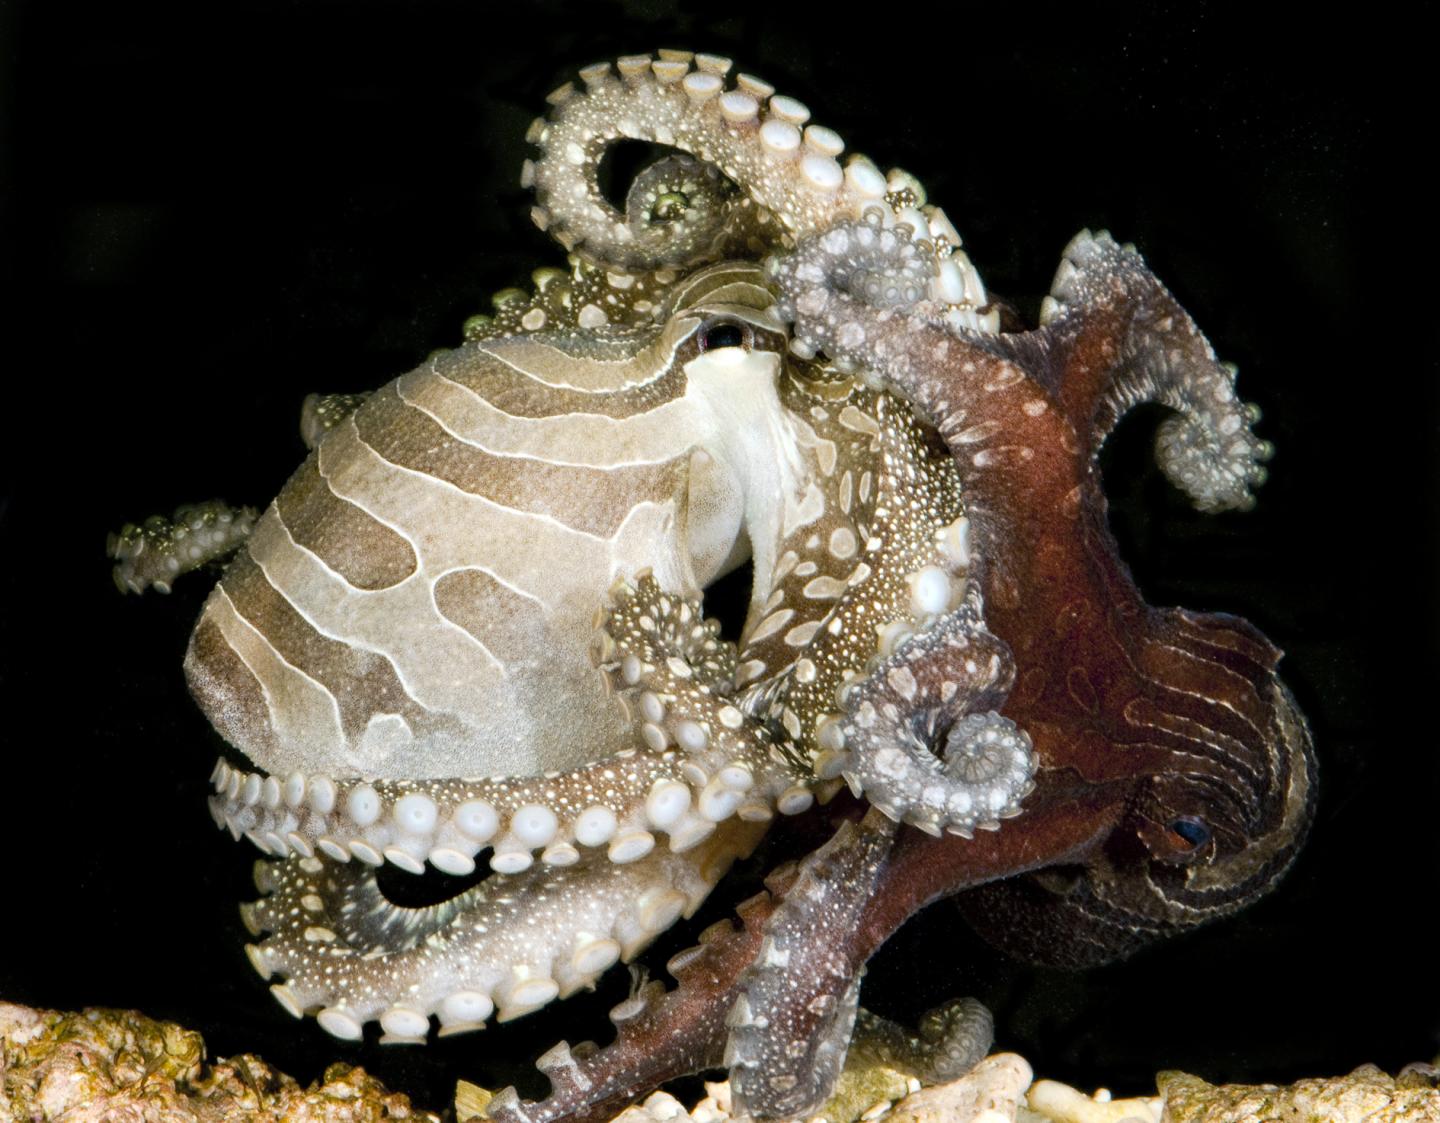 Larger Pacific Striped Octopus Mating